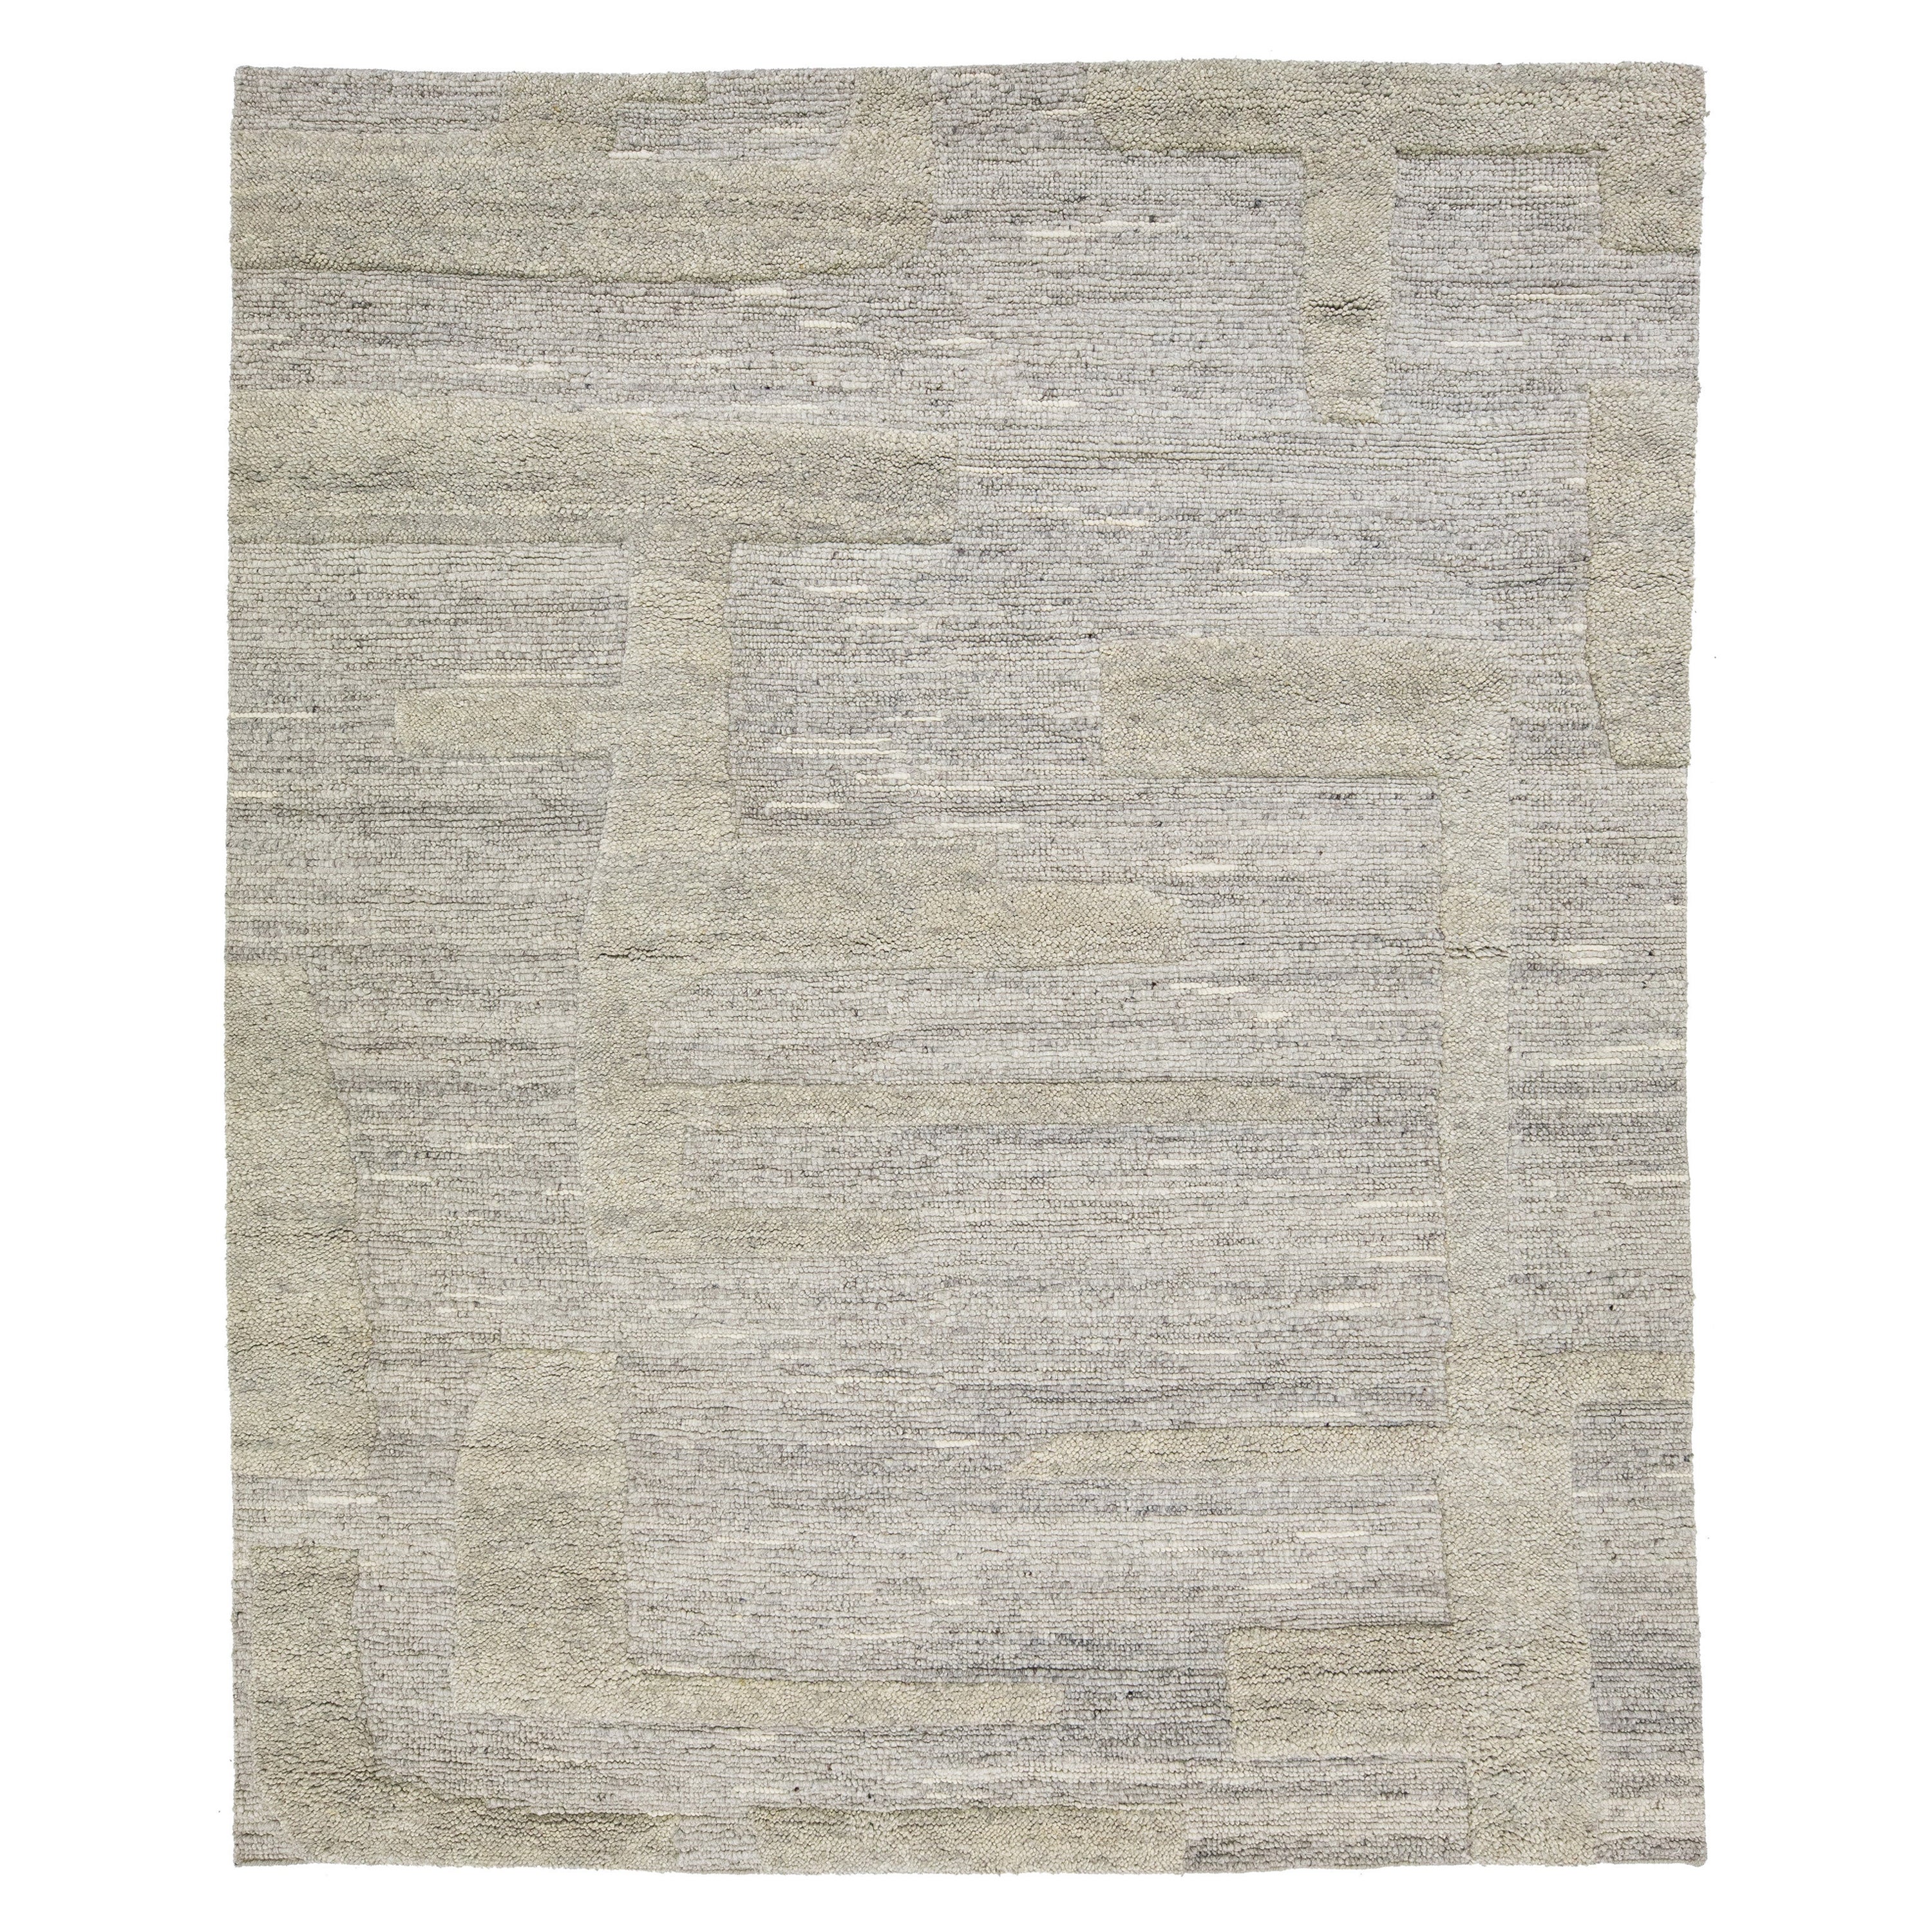 Contemporary Geometric Wool Rug Moroccan-Style In Natural Gray By Apadana For Sale